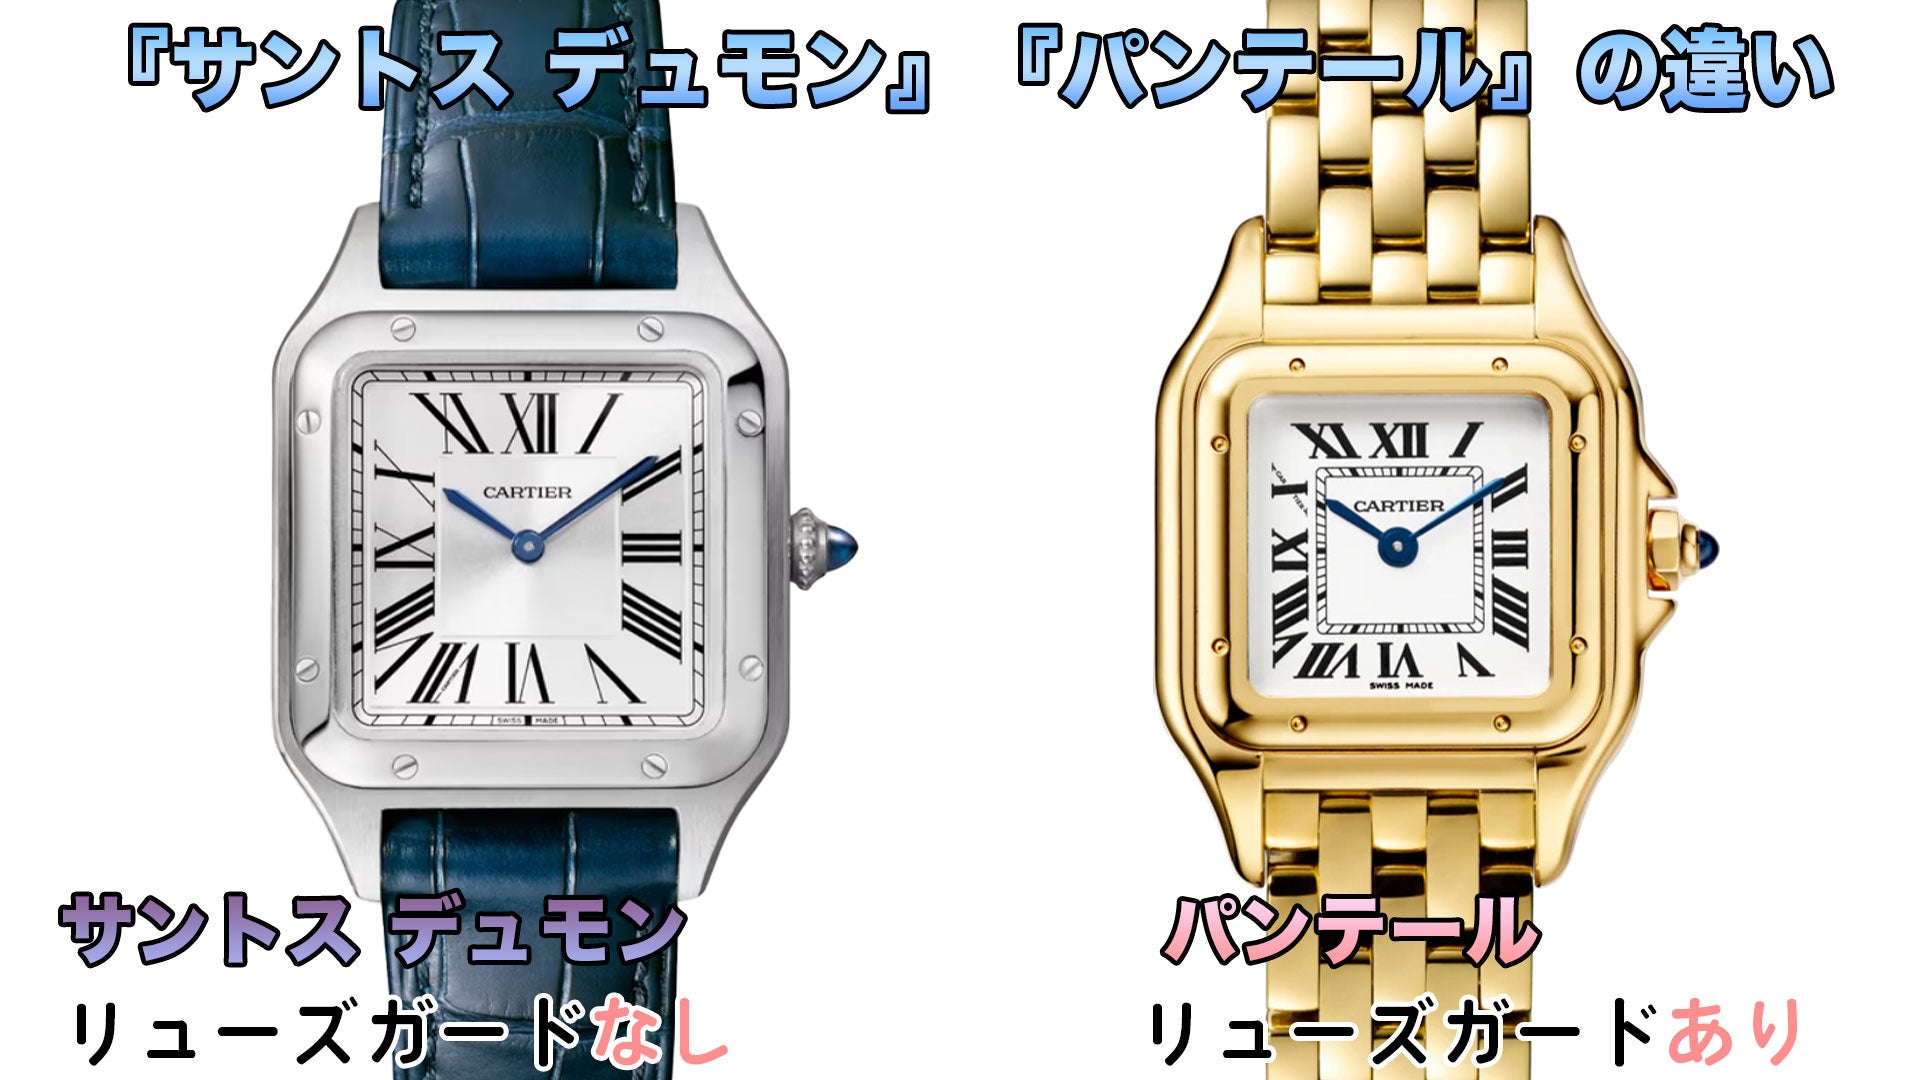 Cartier Watches: Differences between Santos-Dumont and Panthere